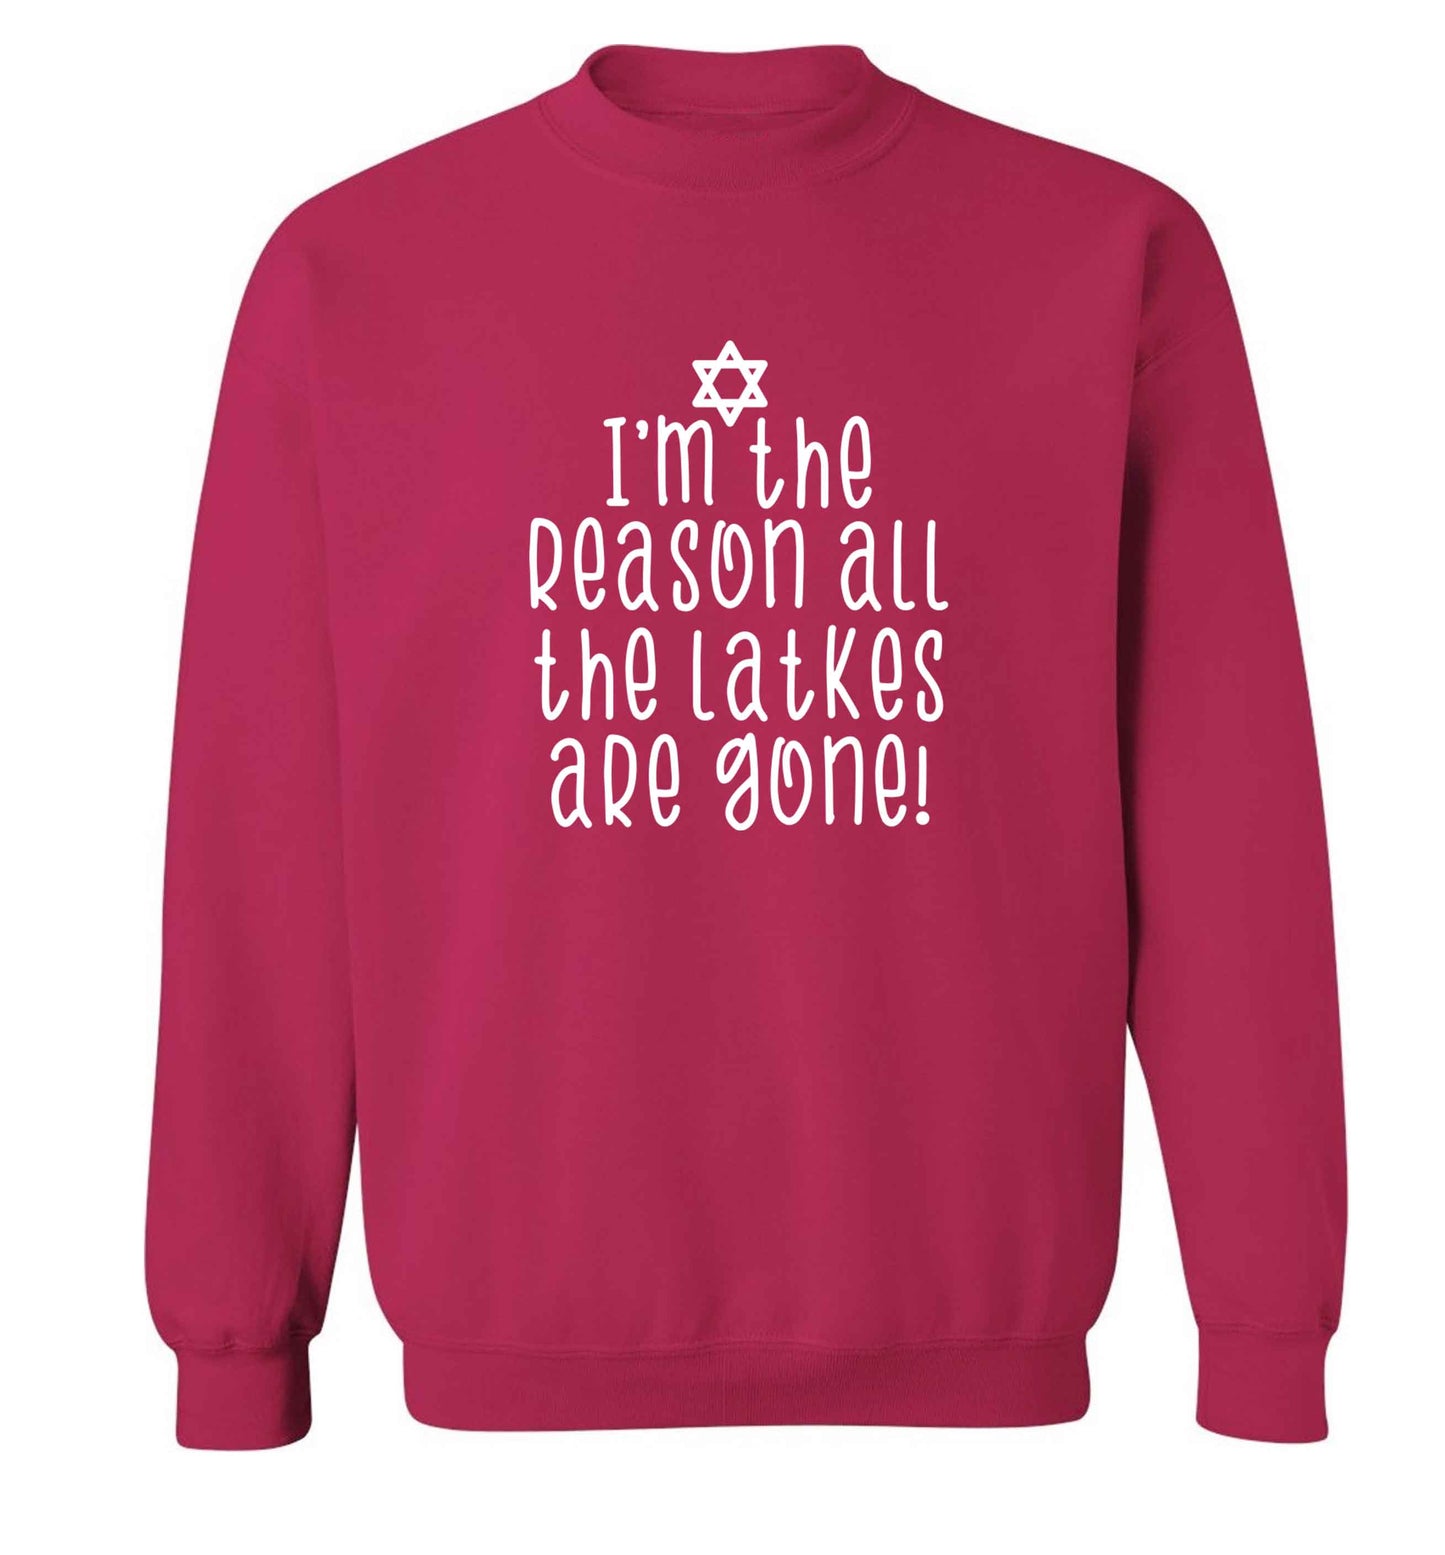 I'm the reason all the latkes are gone adult's unisex pink sweater 2XL